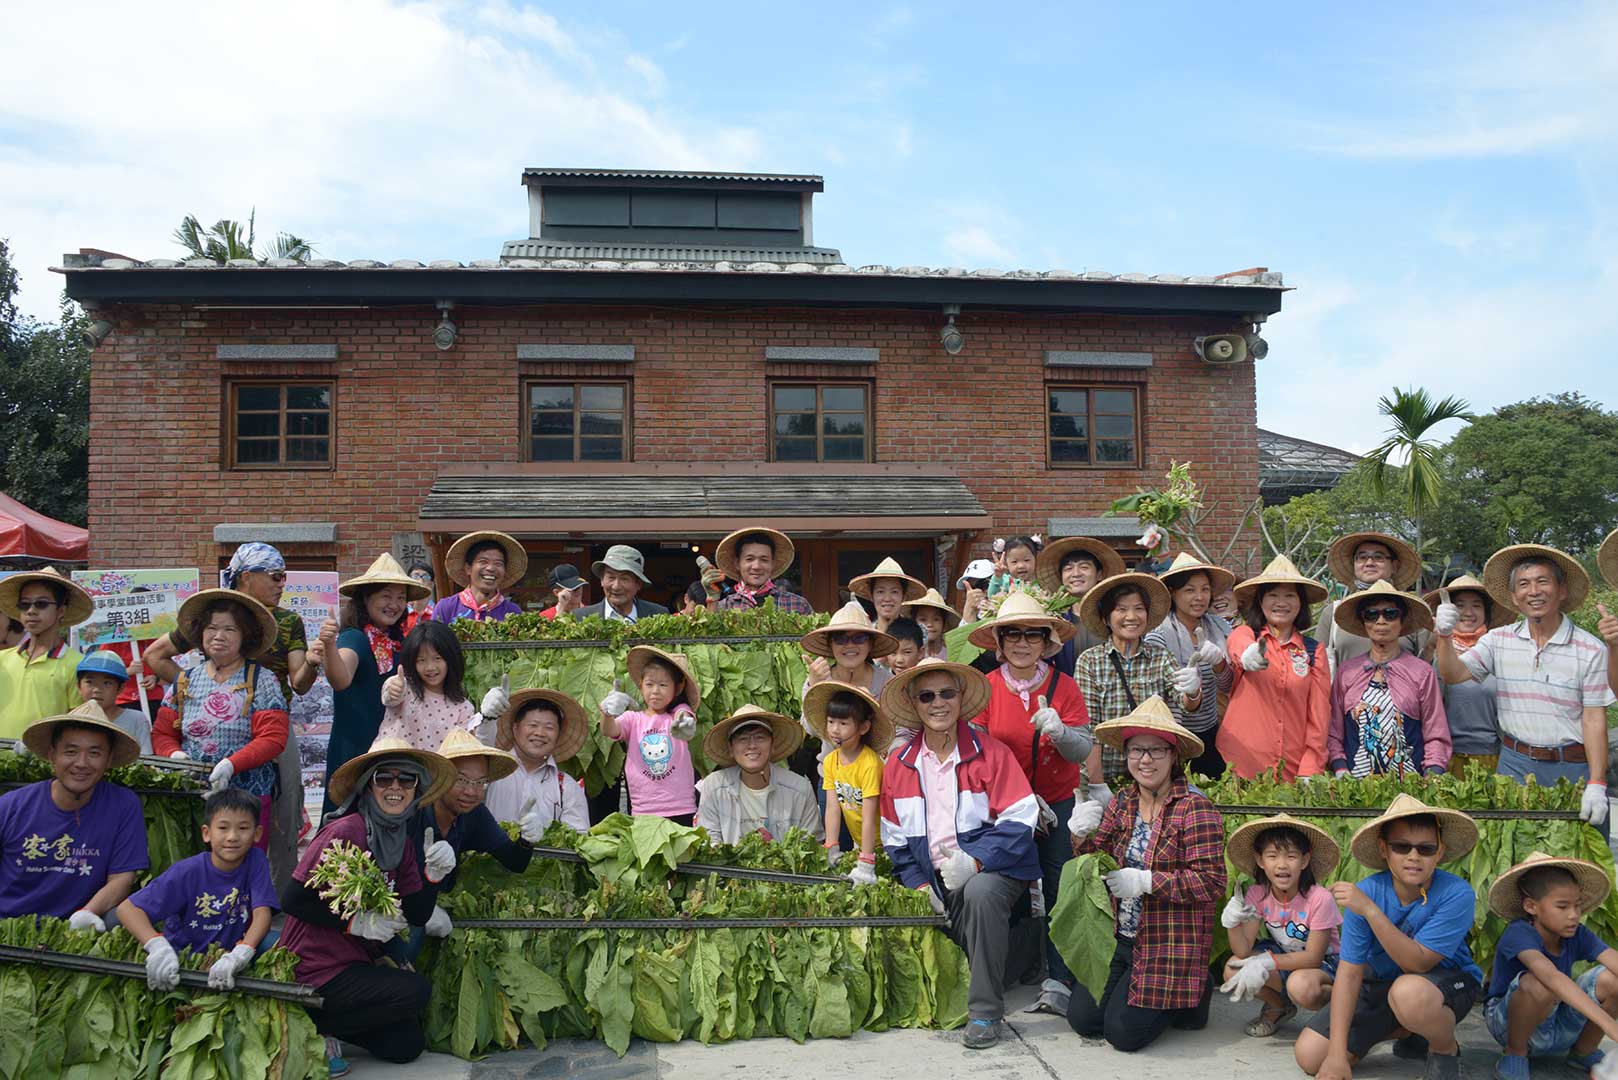 The activity of experiencing tobacco collection was finished!